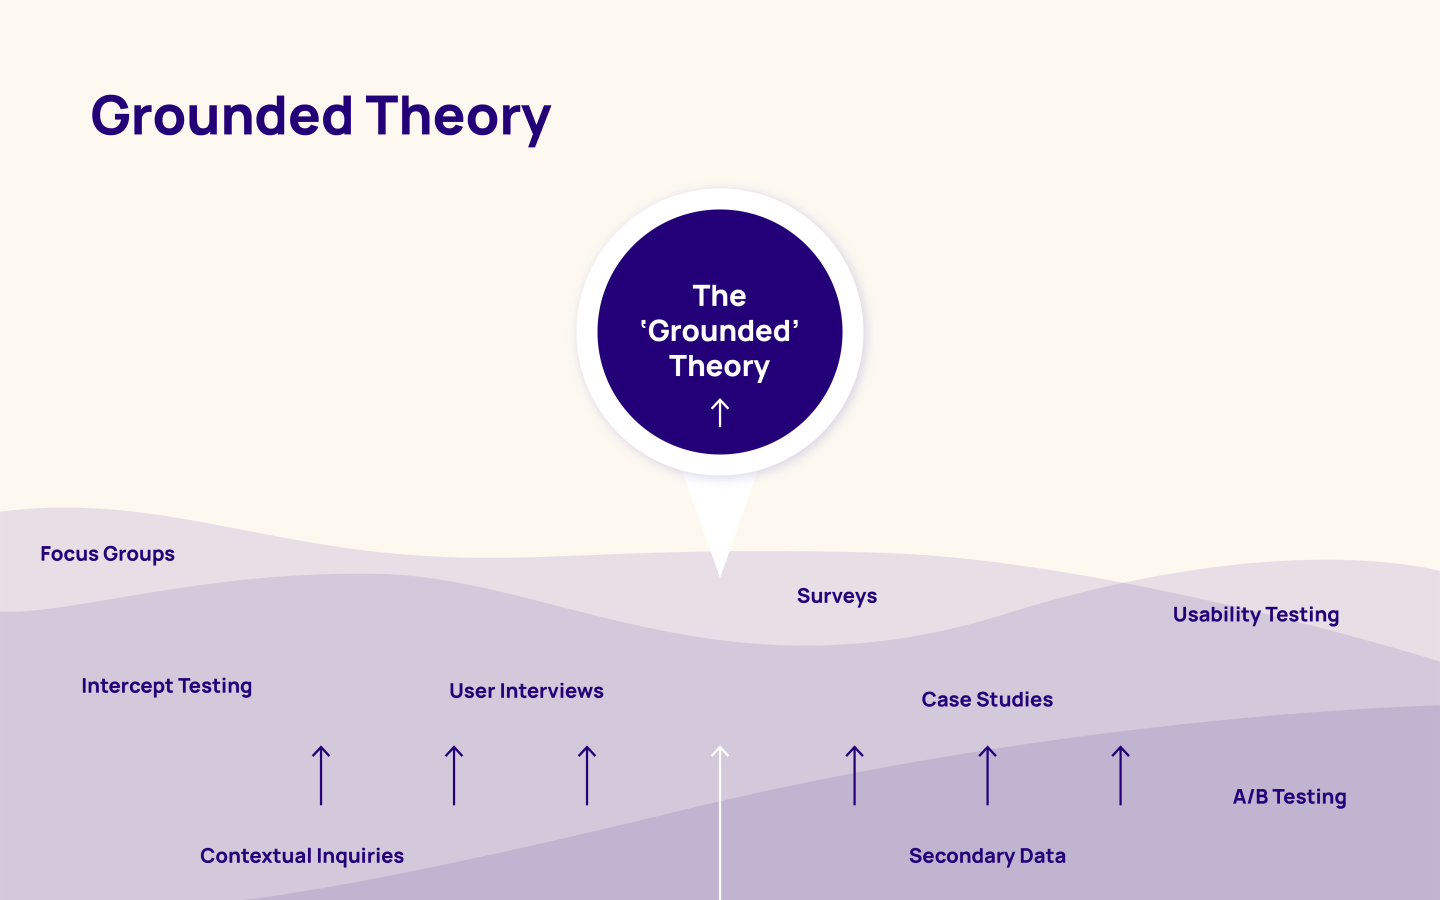 Grounded theory provides a framework for surfacing insights from a large range of data sources. 